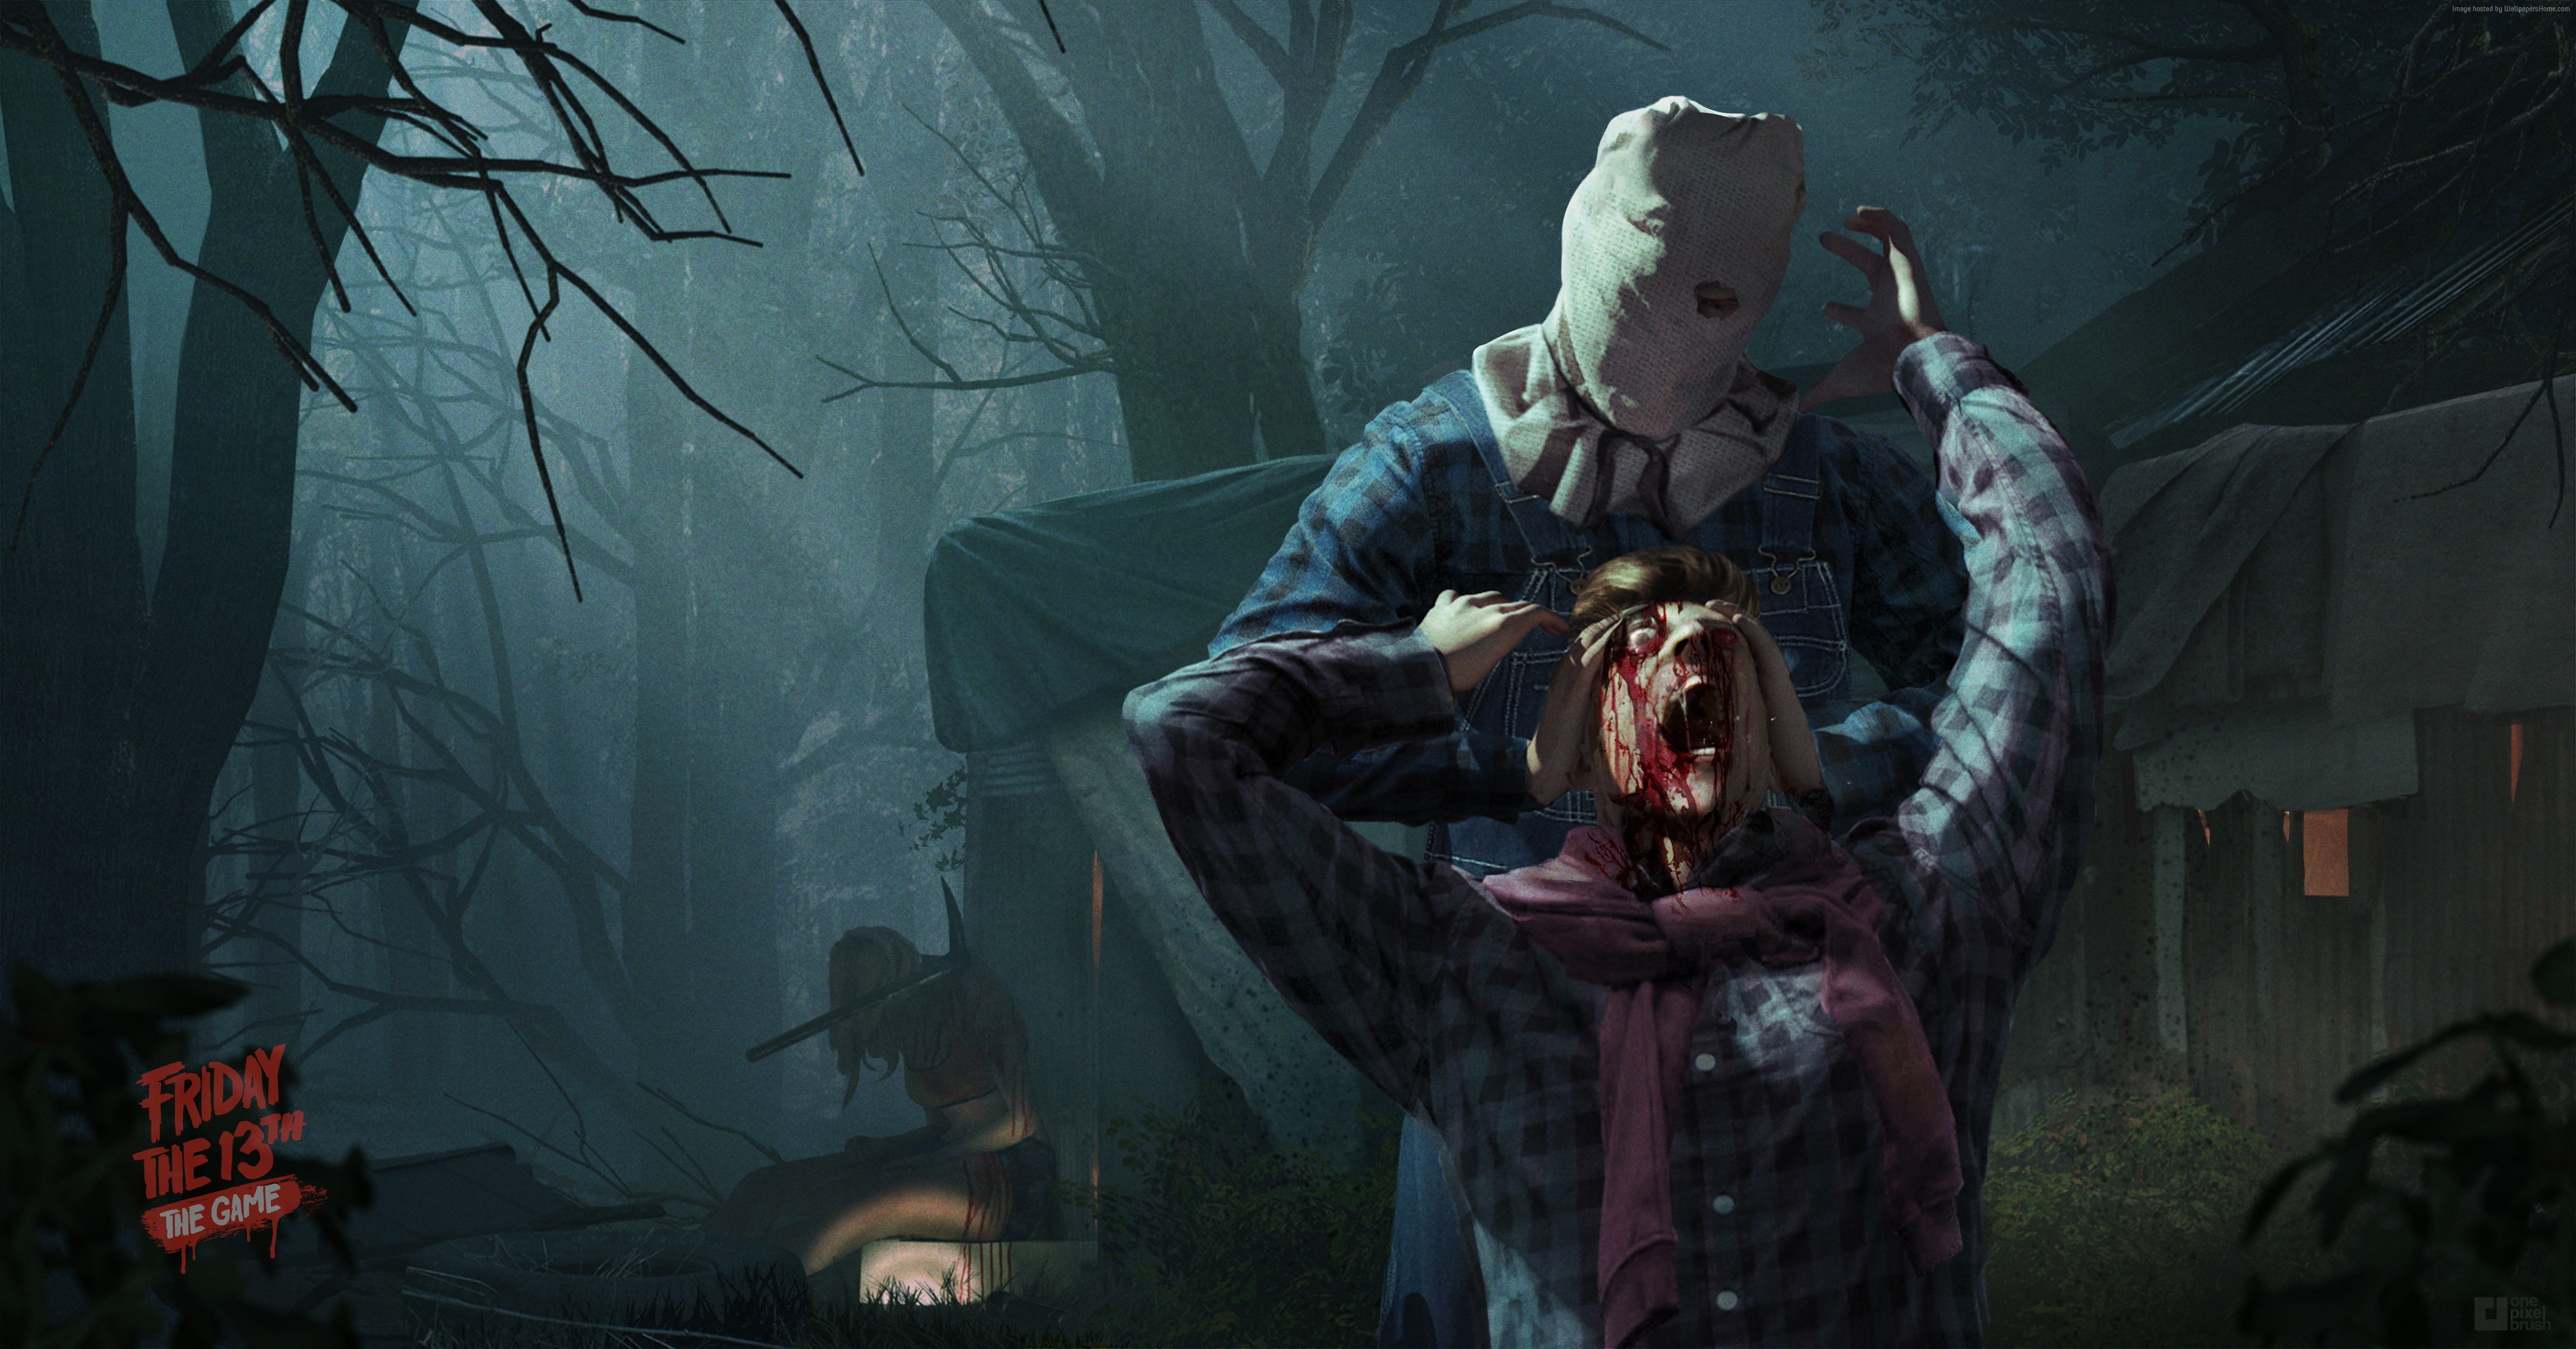 Friday The 13th, The Game!